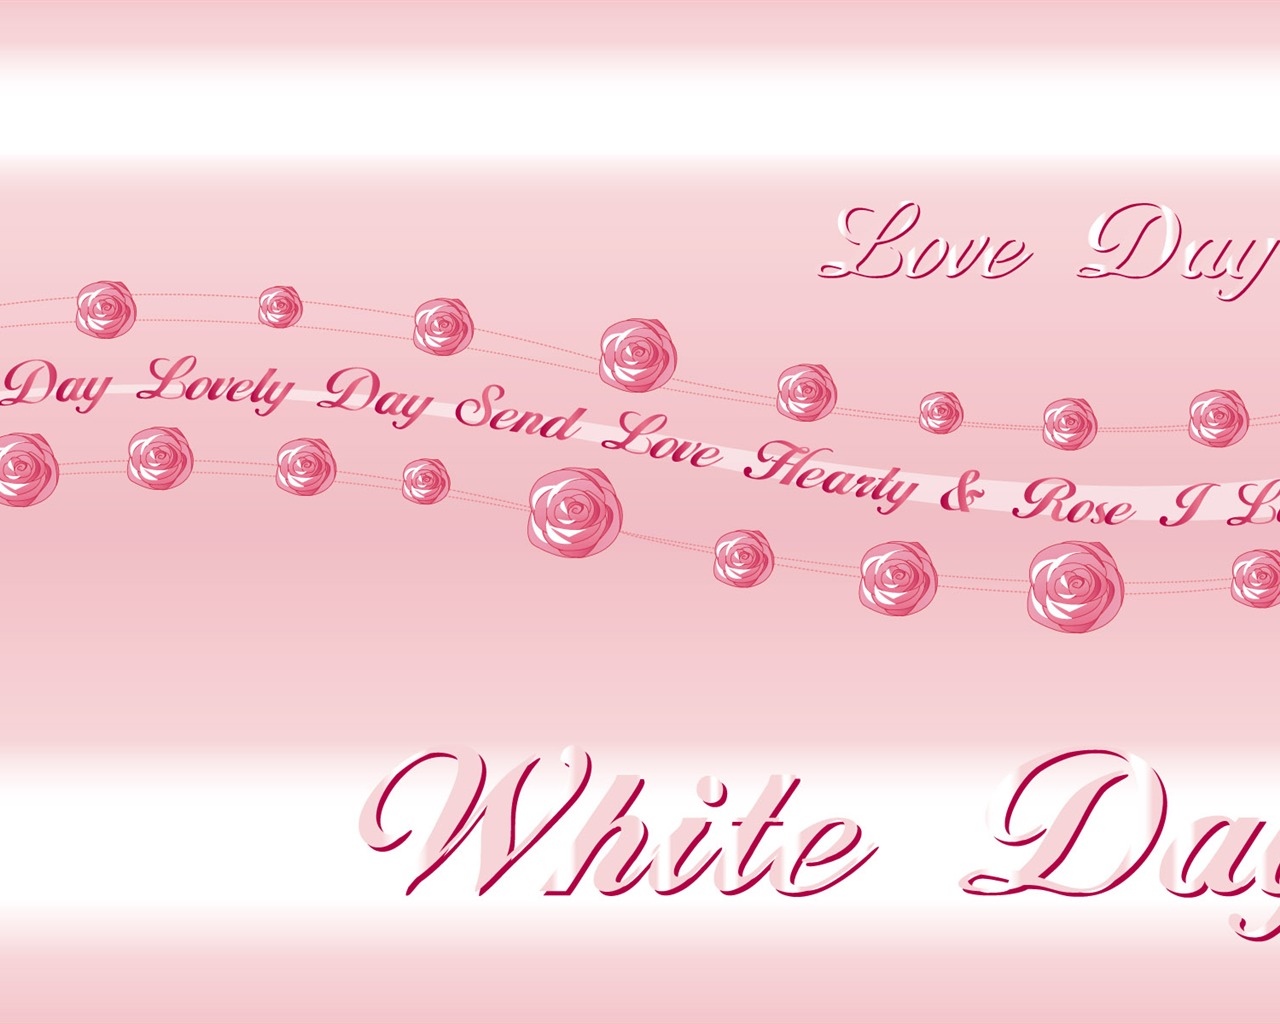 Valentine's Day Theme Wallpapers (2) #10 - 1280x1024